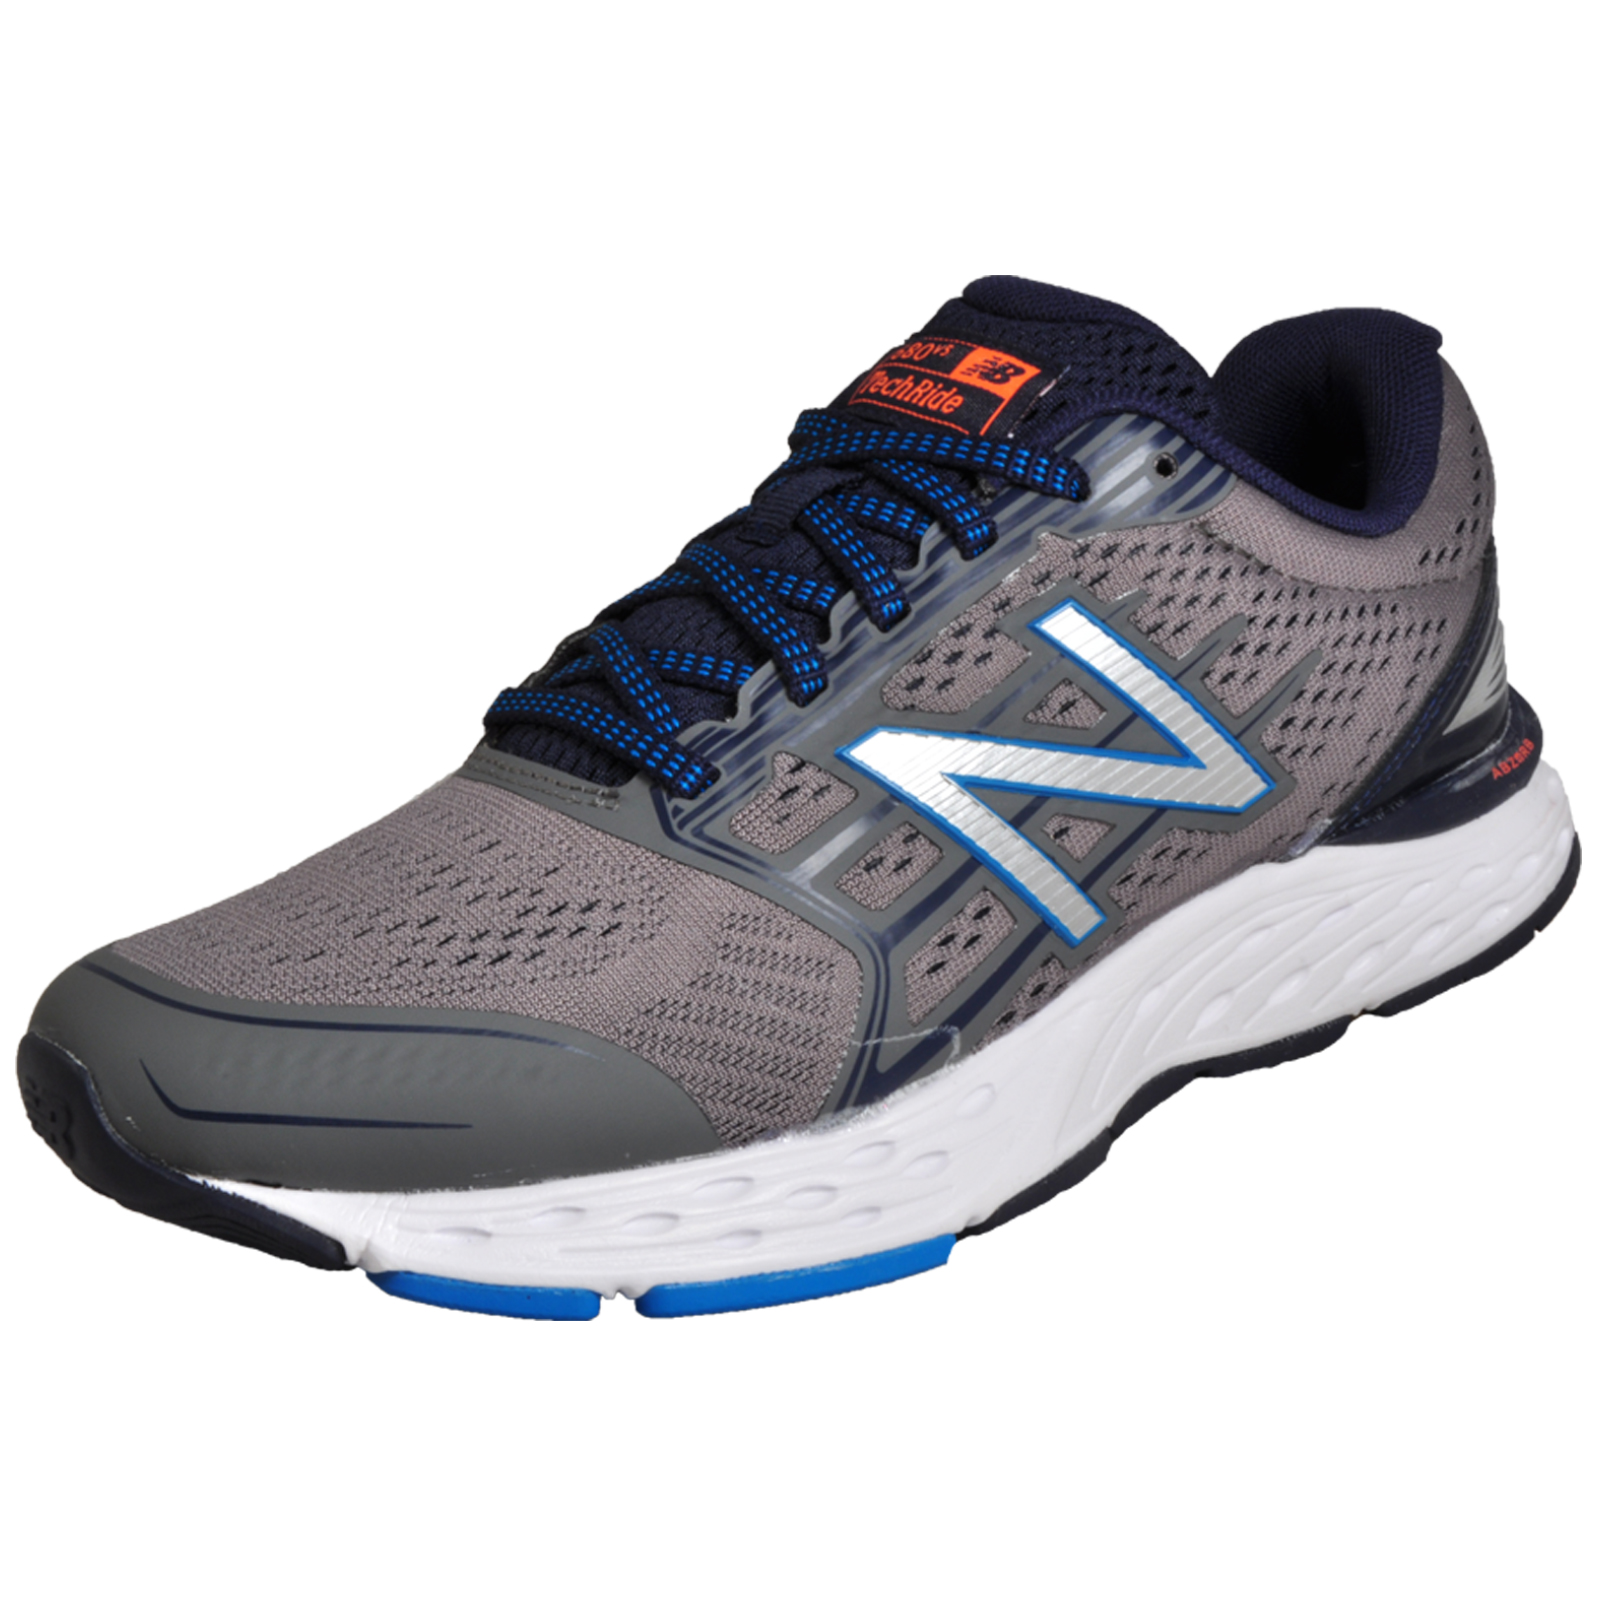 New Balance 680 v5 Mens Running Shoes Fitness Gym Trainers Grey | eBay